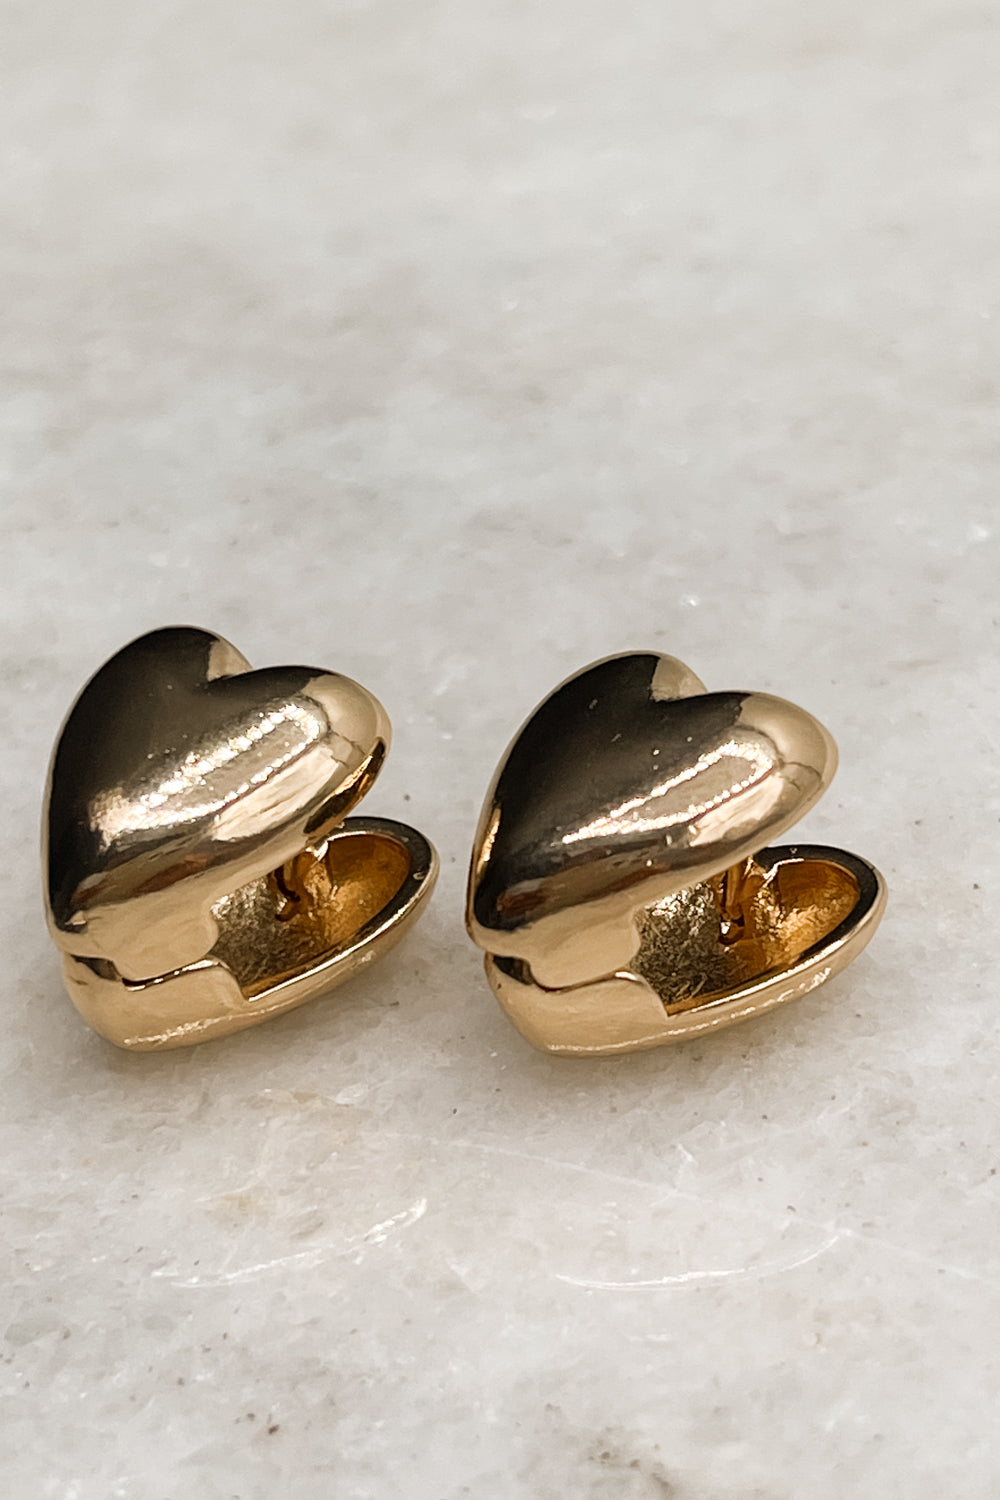 Alternate view of the The Raine Earrings is shown against a neutral background. They are gold heart-shaped studs.